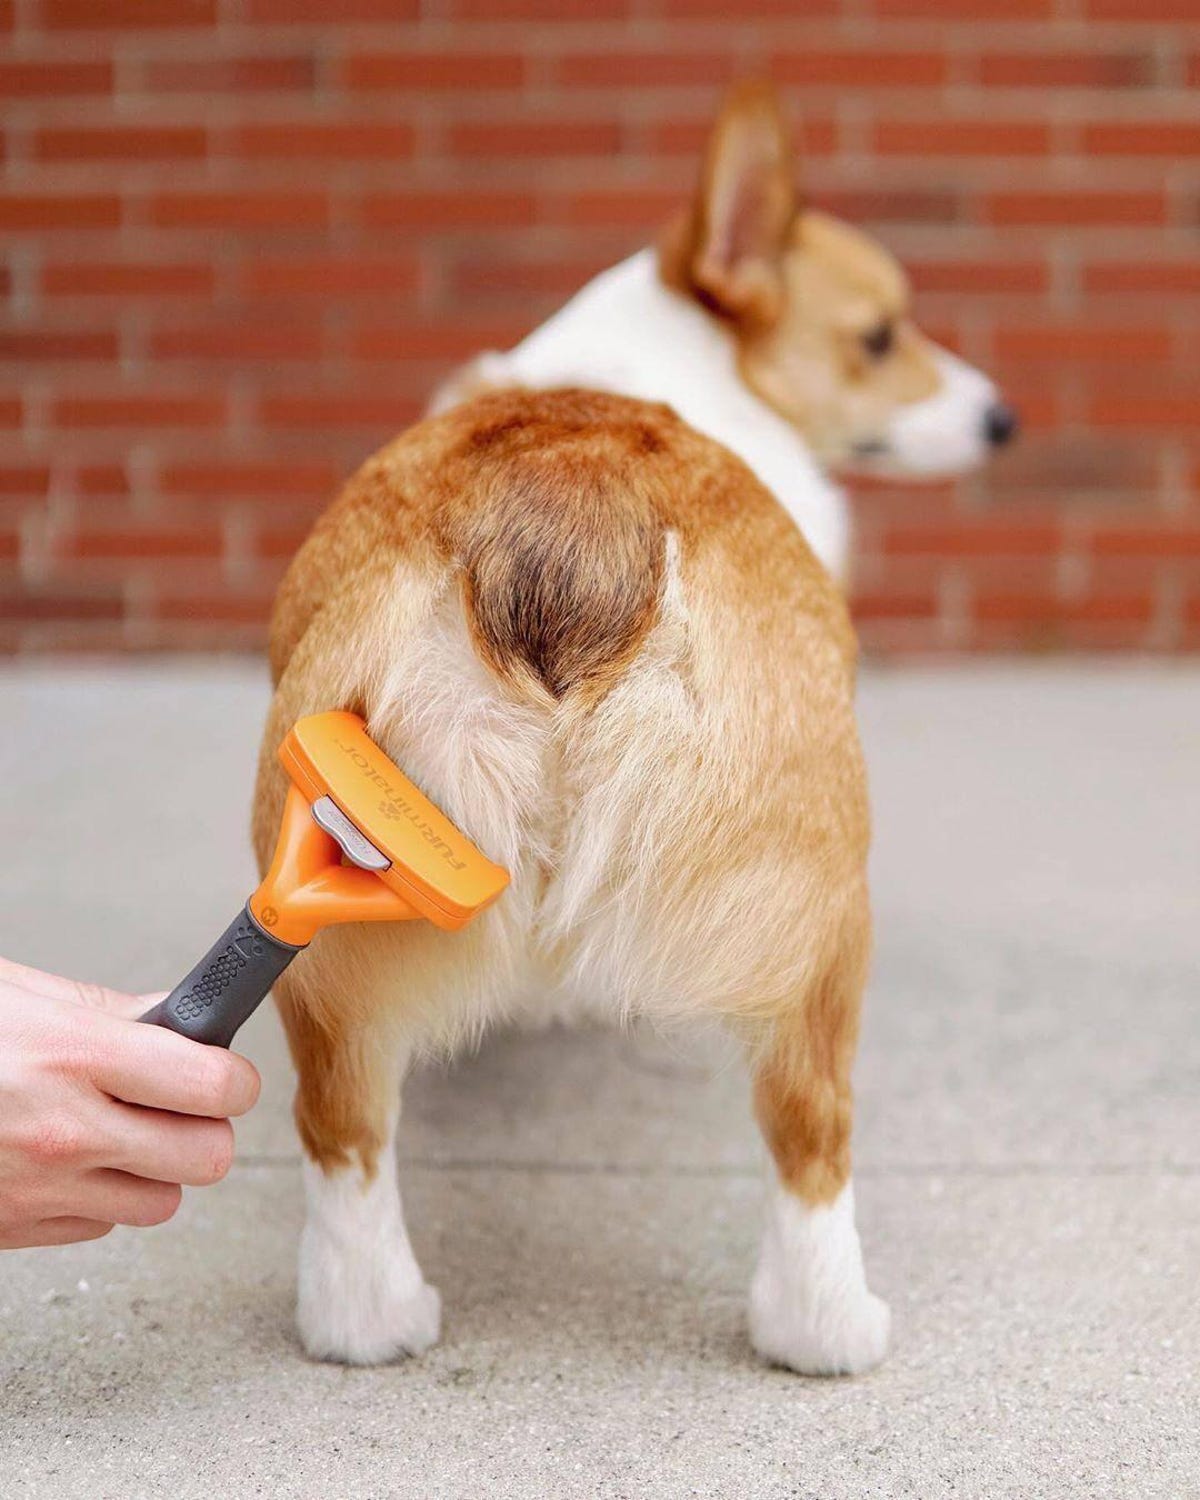 A dog getting brushed